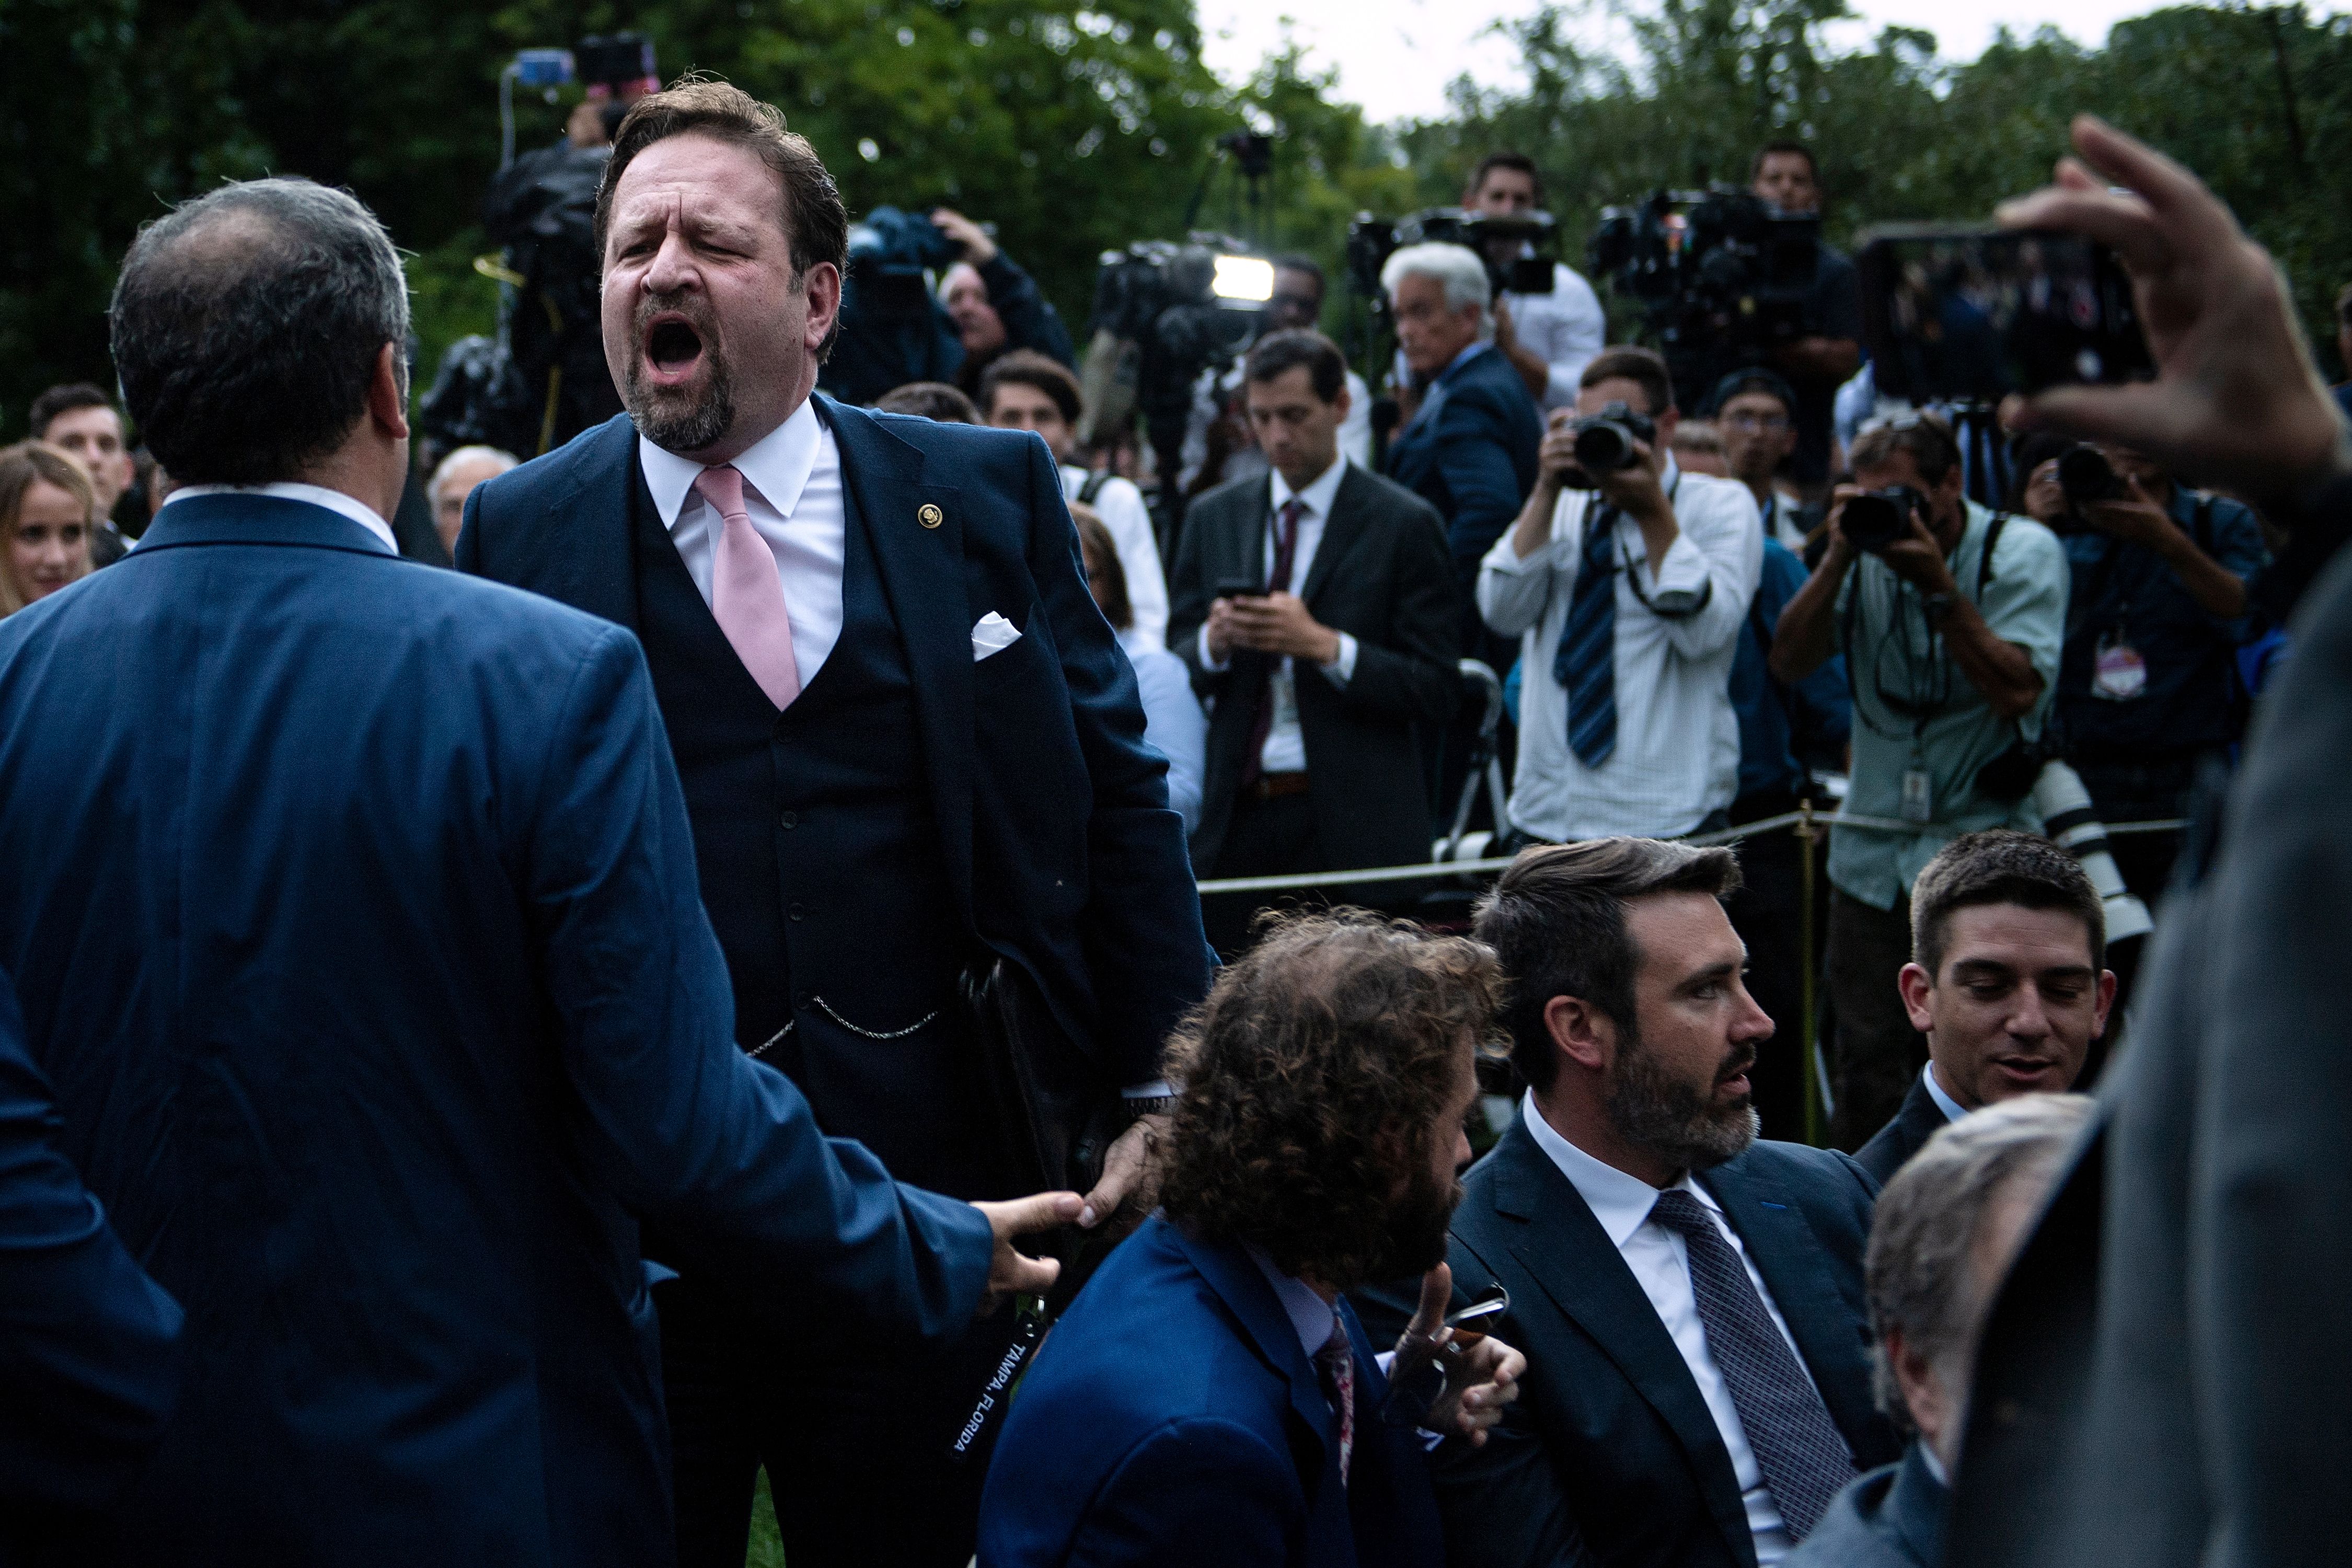 Playboy magazine contributor Brian Karem (L) and former Trump deputy assistant Sebastian Gorka (2ndL) argue after the US president delivered remarks on citizenship and the census at the White House in Washington, DC, on July 11, 2019. (BRENDAN SMIALOWSKI/AFP/Getty Images)